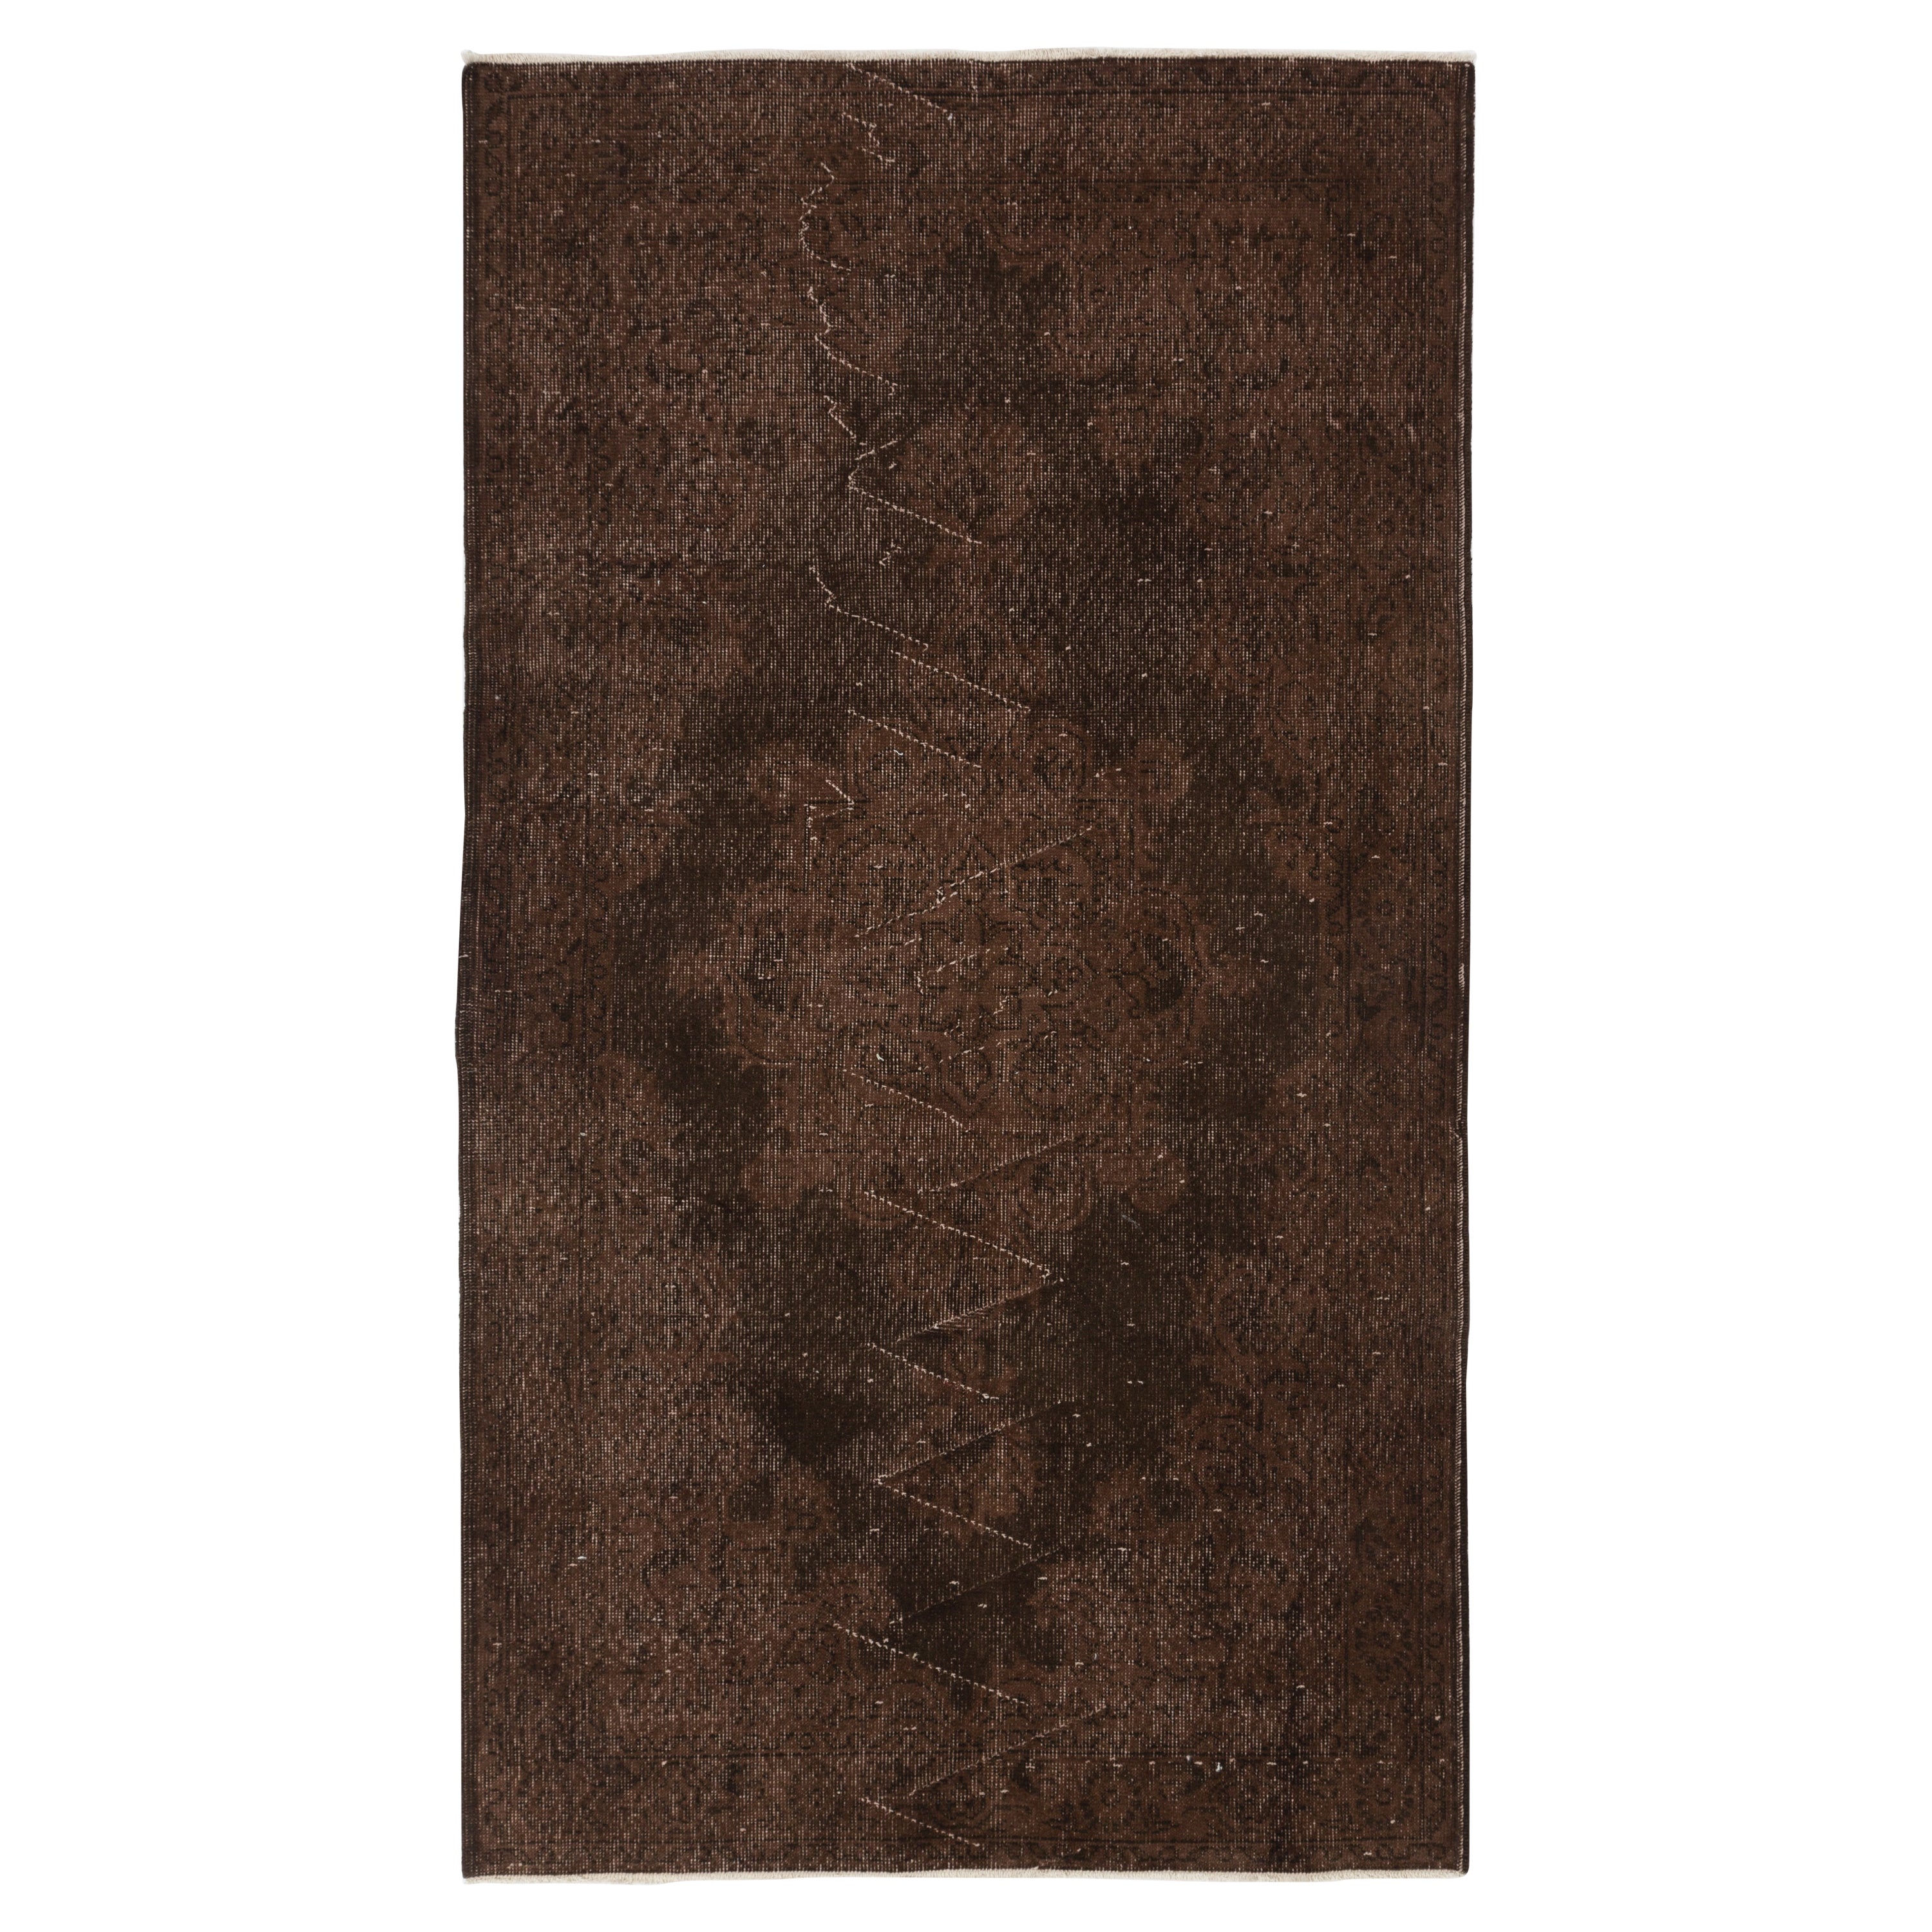 Handmade Vintage Anatolian Accent Rug in Brown for Contemporary Interiors